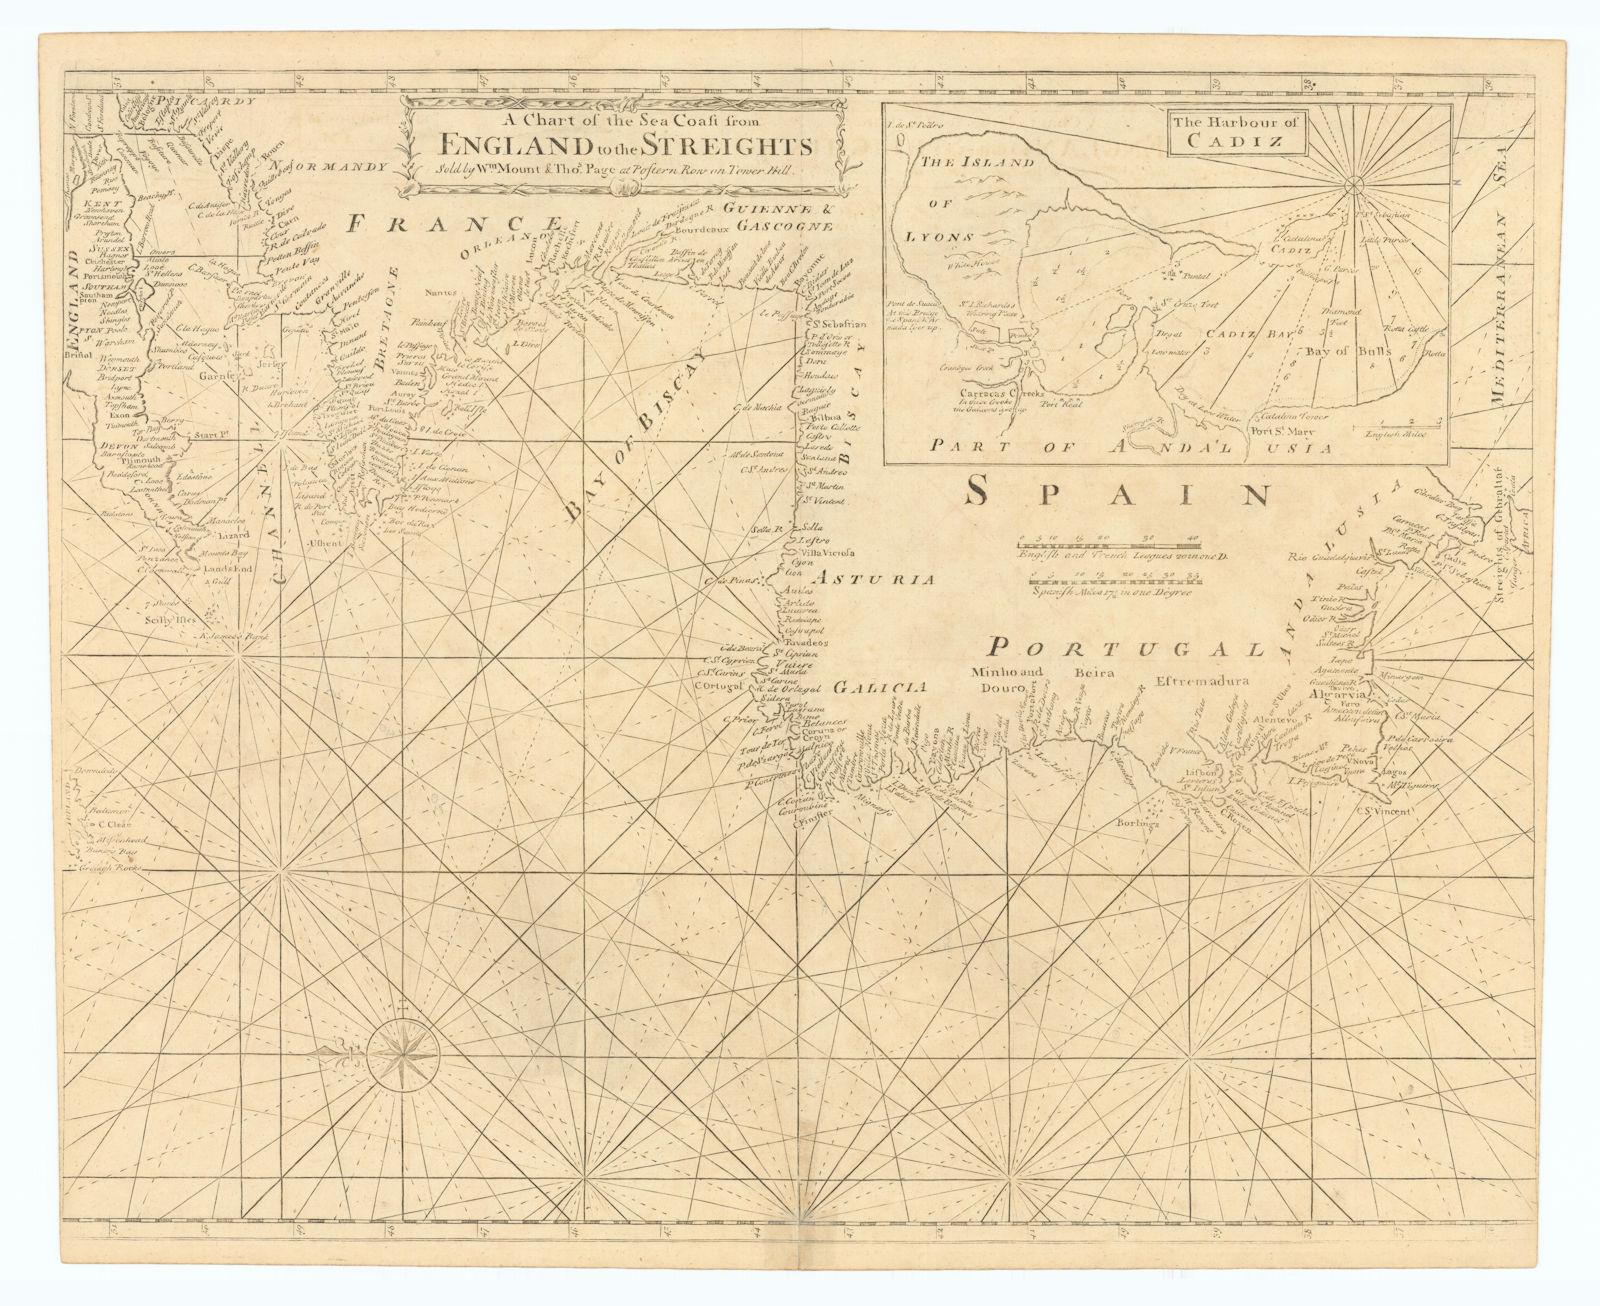 Associate Product A Chart of the Sea Coast from England to the Streights. MOUNT & PAGE 1758 map